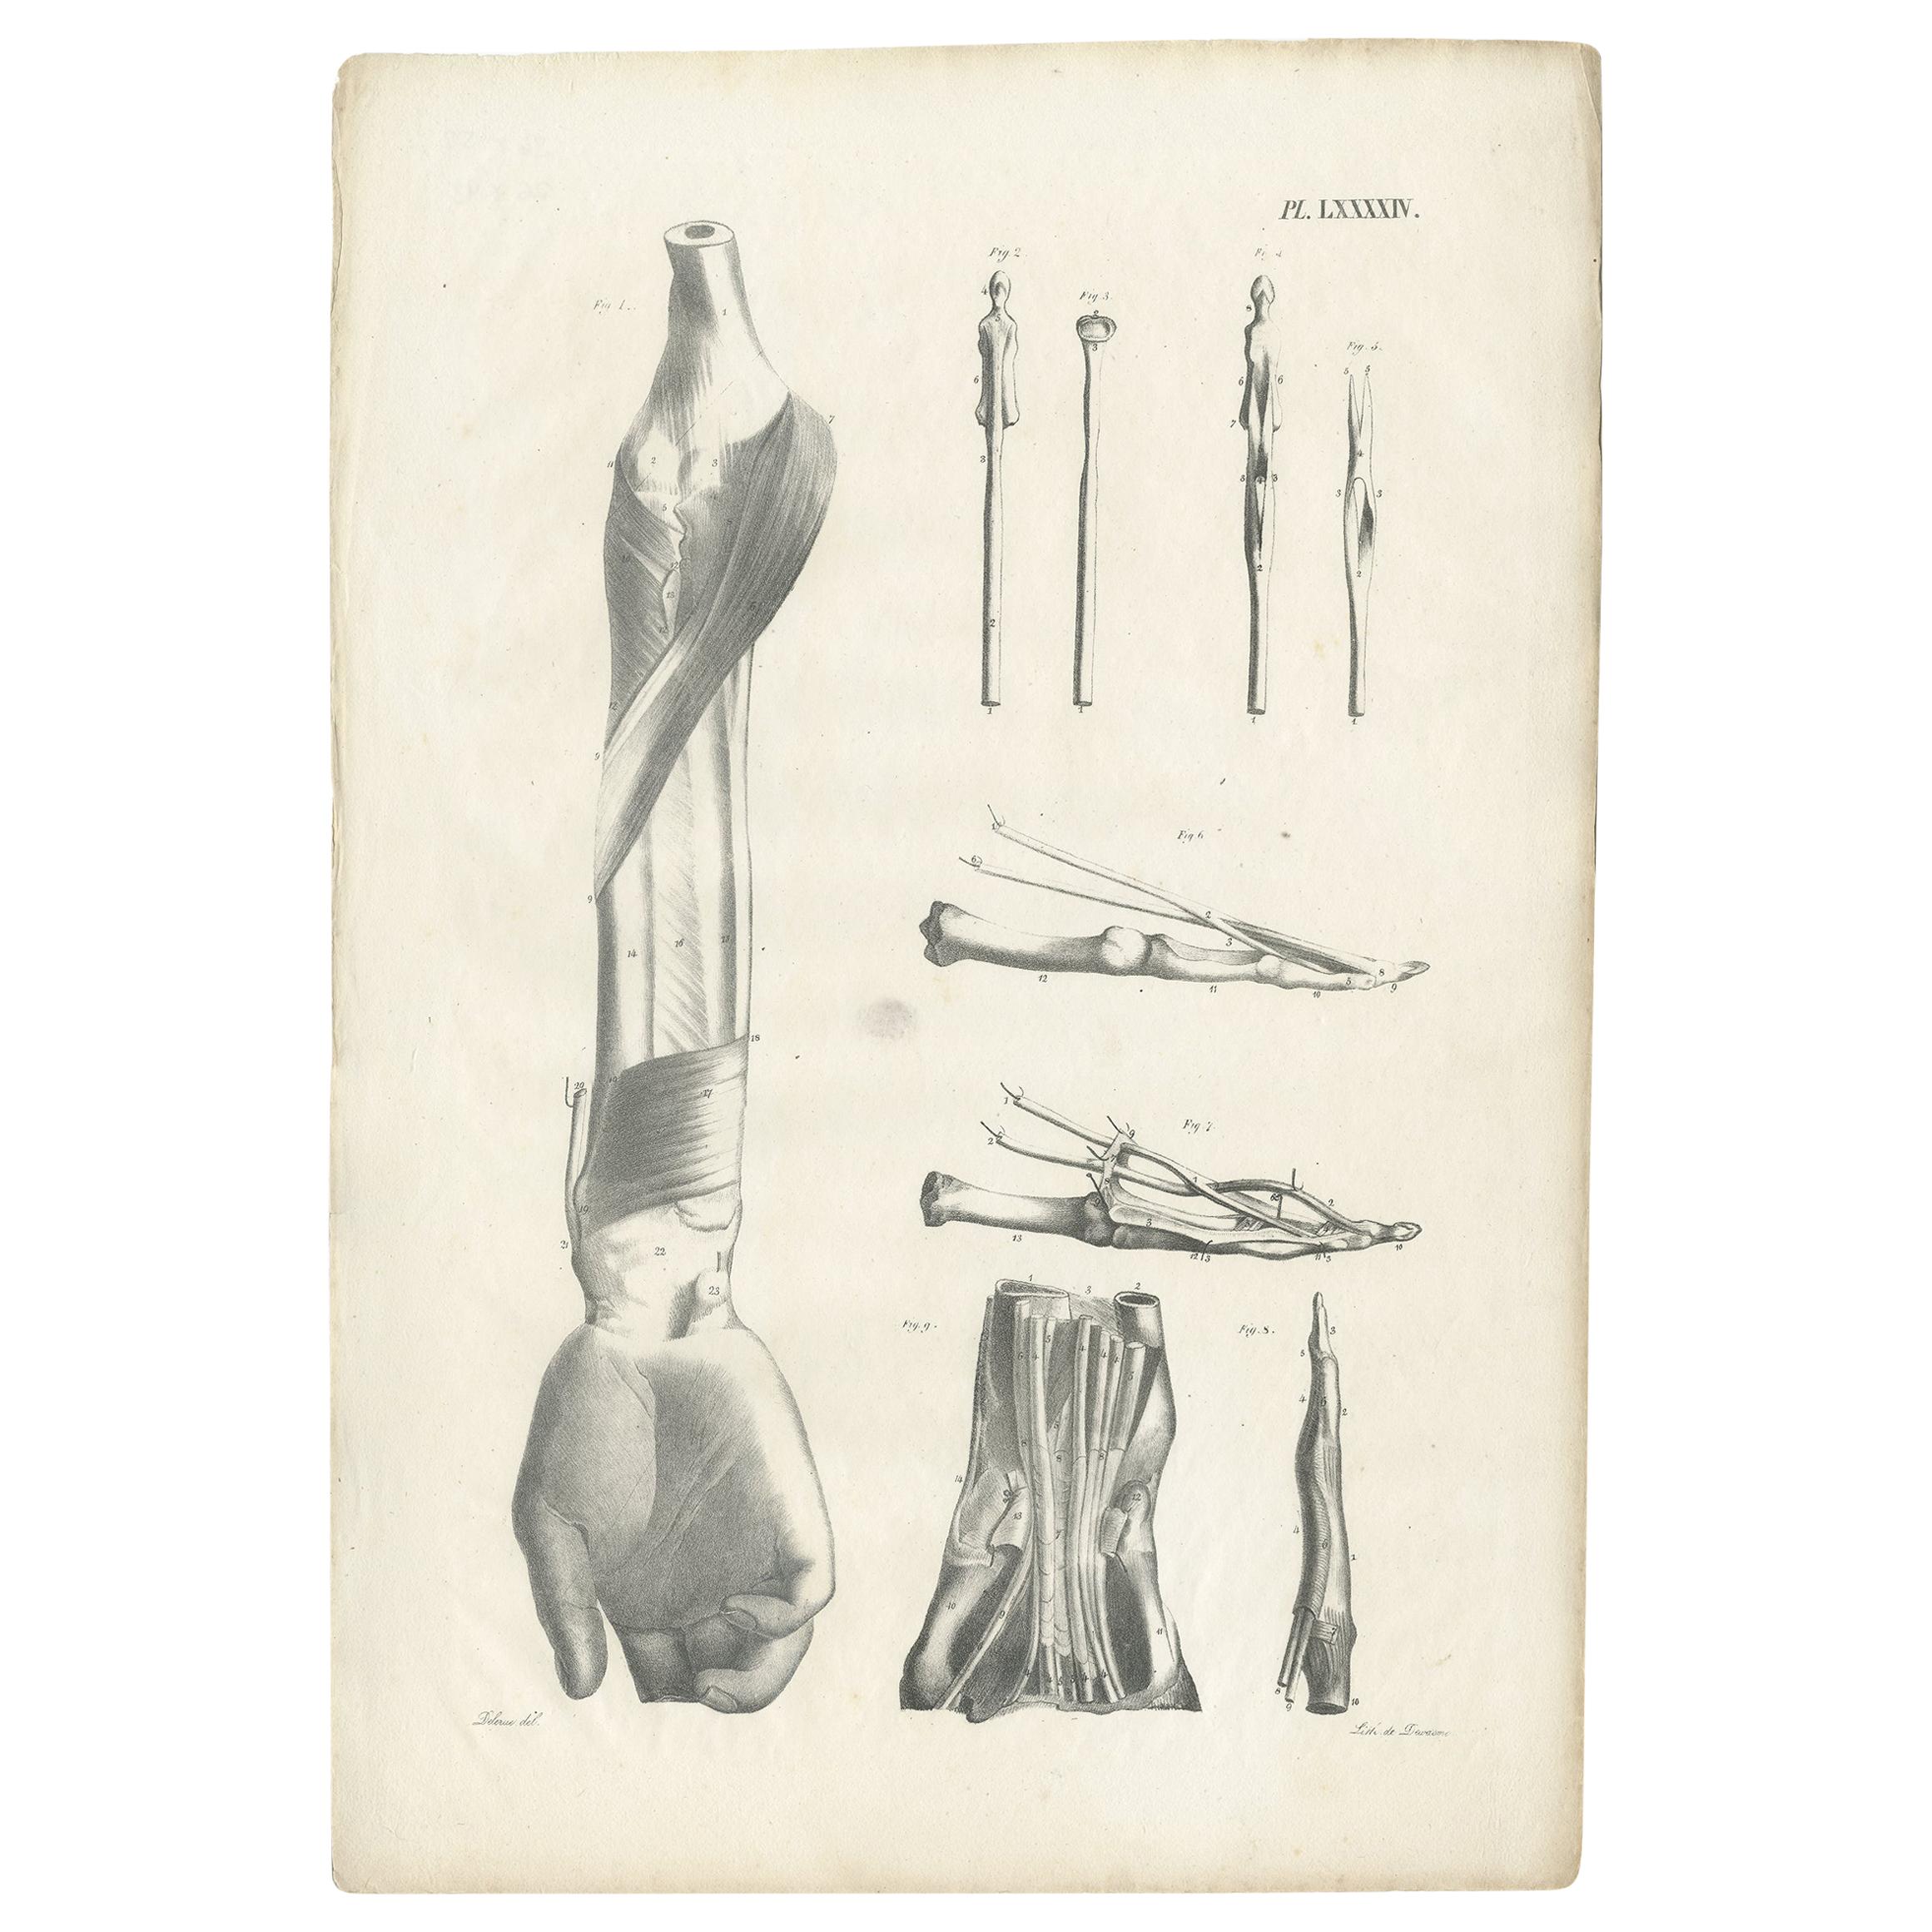 Pl. LXXXXIV Antique Anatomy / Medical Print of the Forearm by Cloquet, 1821 For Sale